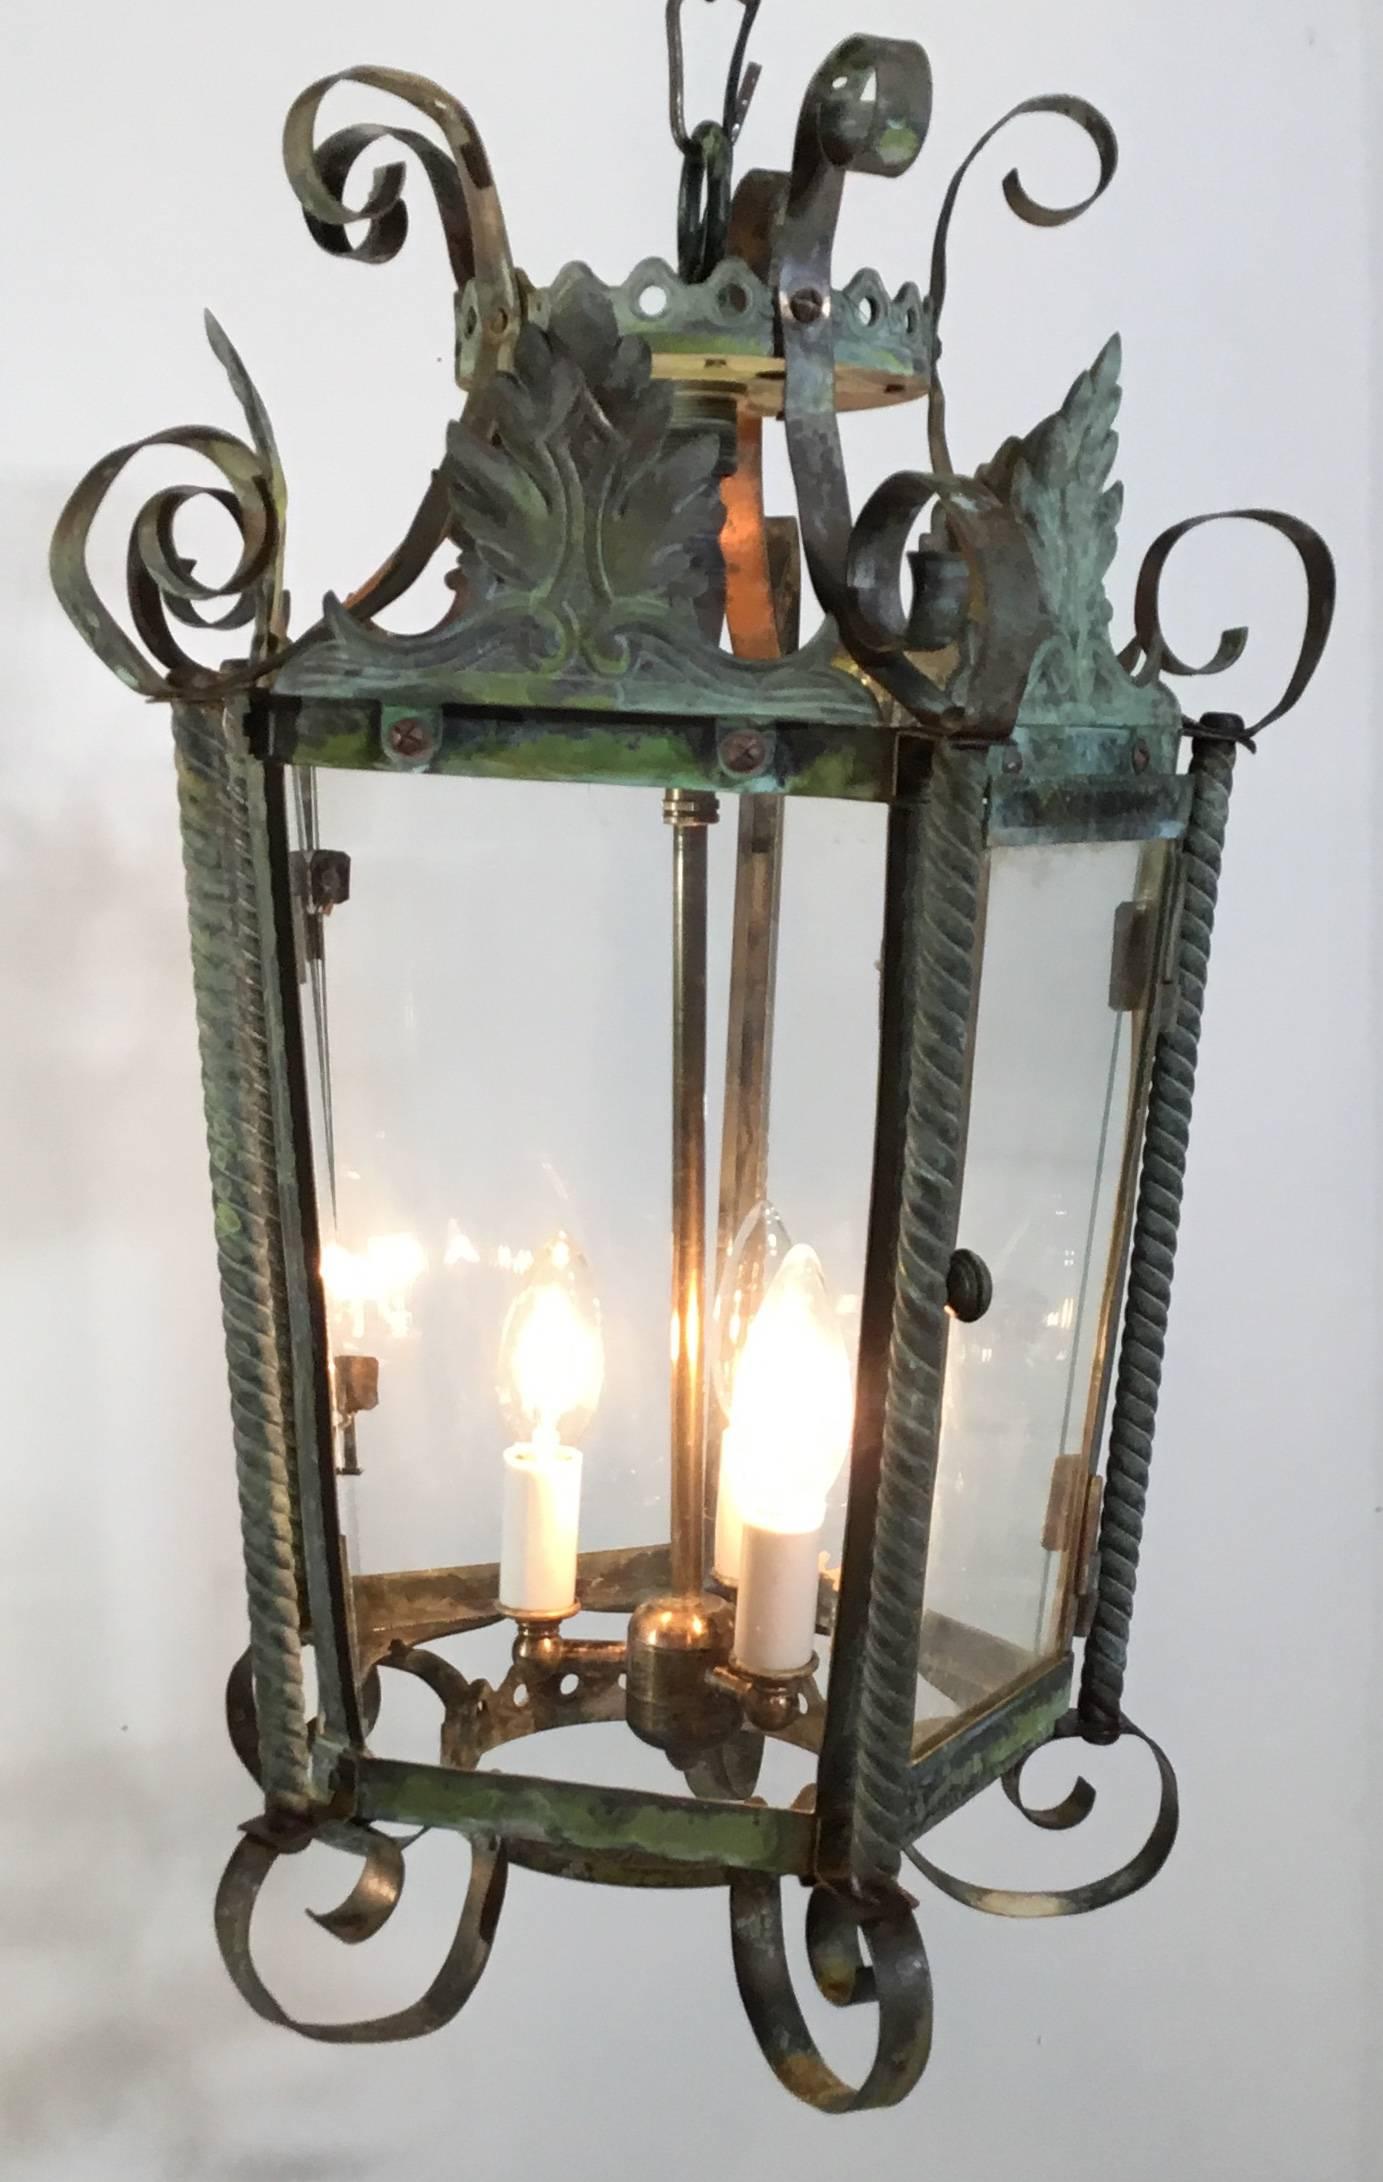 Elegant antique lantern made of twisted copper, brass columns and bronze top plate and crown.
The artistic hand-forged lantern was made originally as candle holder and later in time was added glass and electrified with new 40/watt brass stem up to